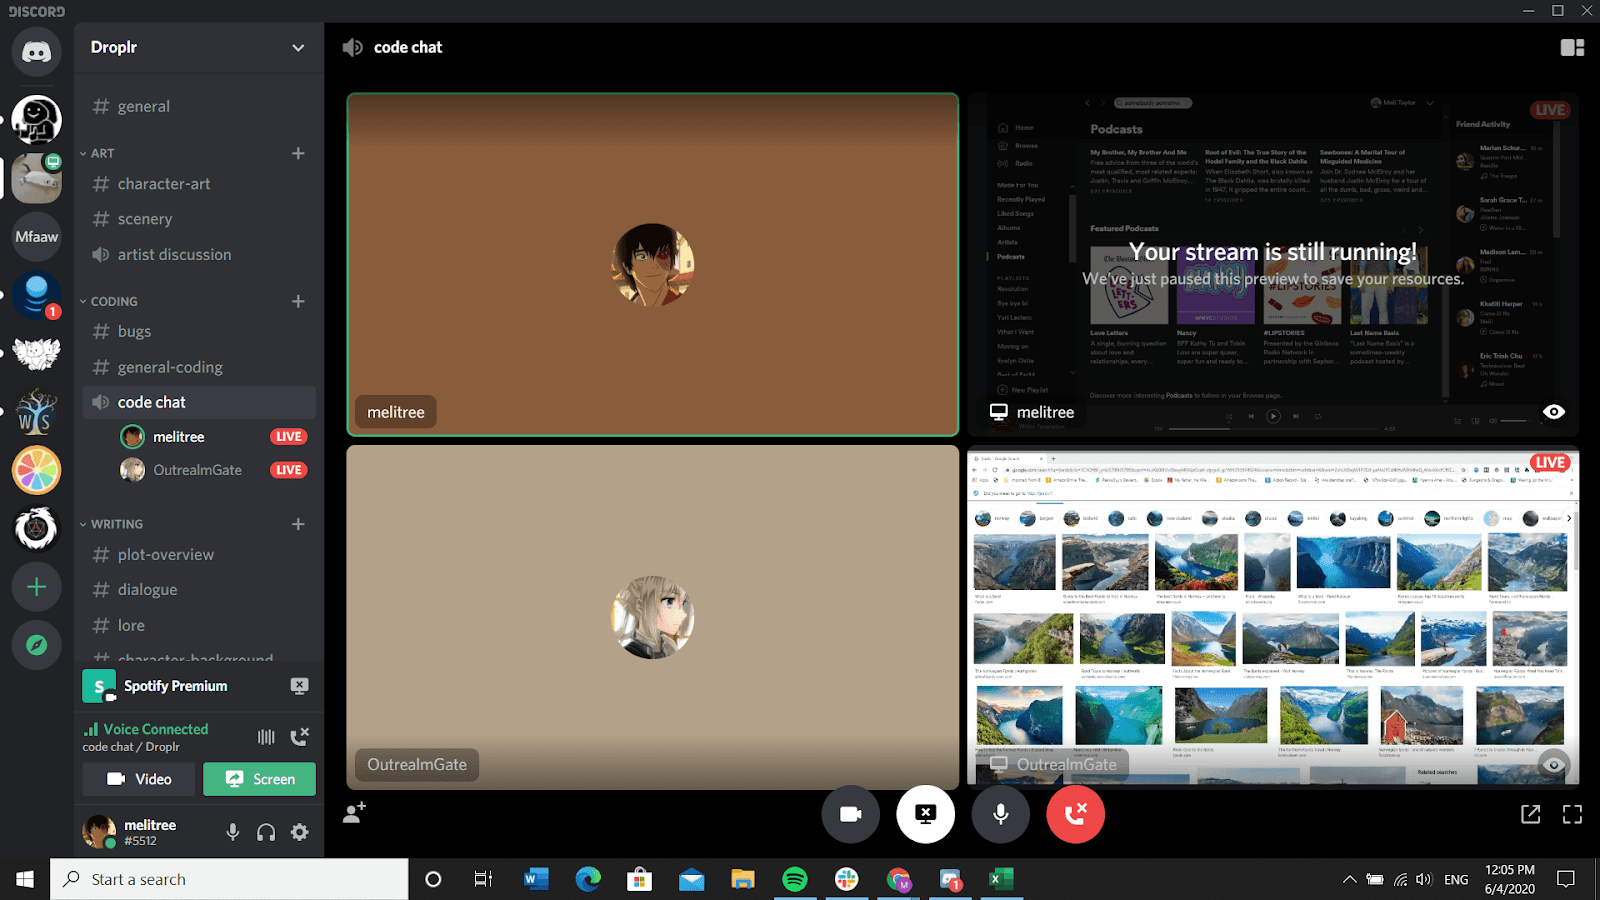 How To Screen Share On Discord Updated Oct 2020 Droplr How To S - recording roblox with a fan voice chat youtube